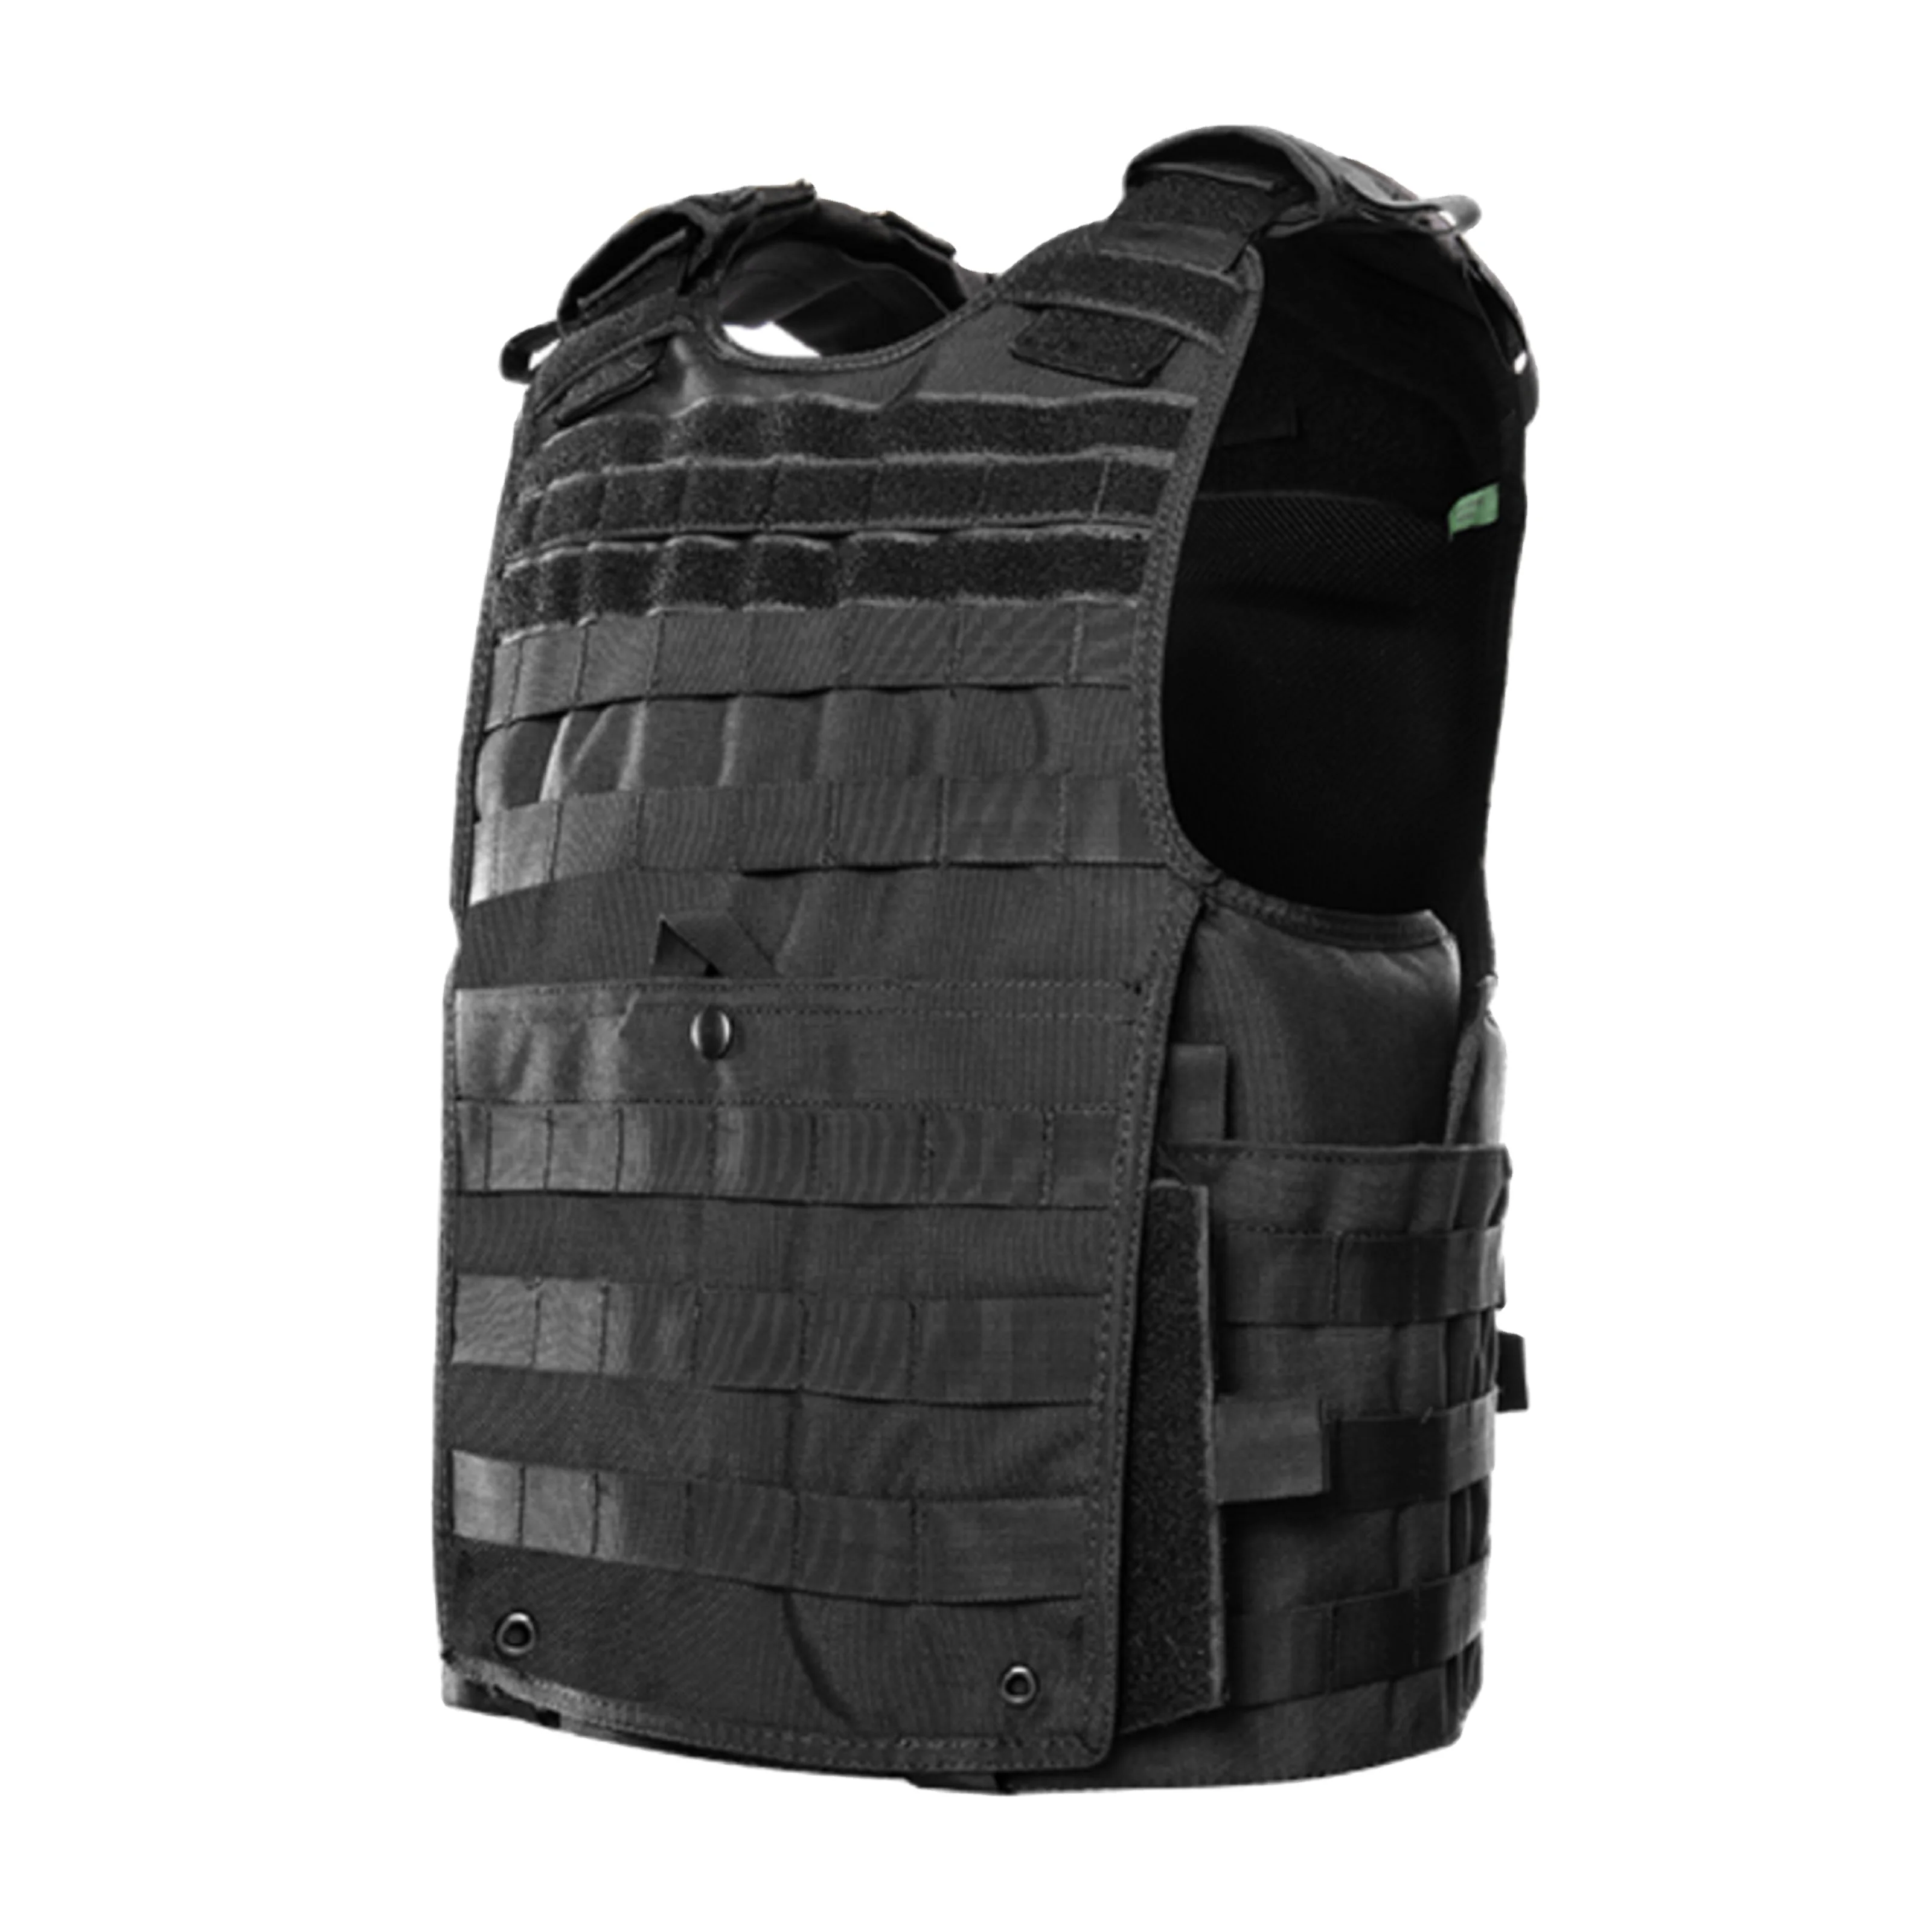 Condor Enforcer Releasable Plate Carrier Army Tactical Military MOLLE Vest Black 